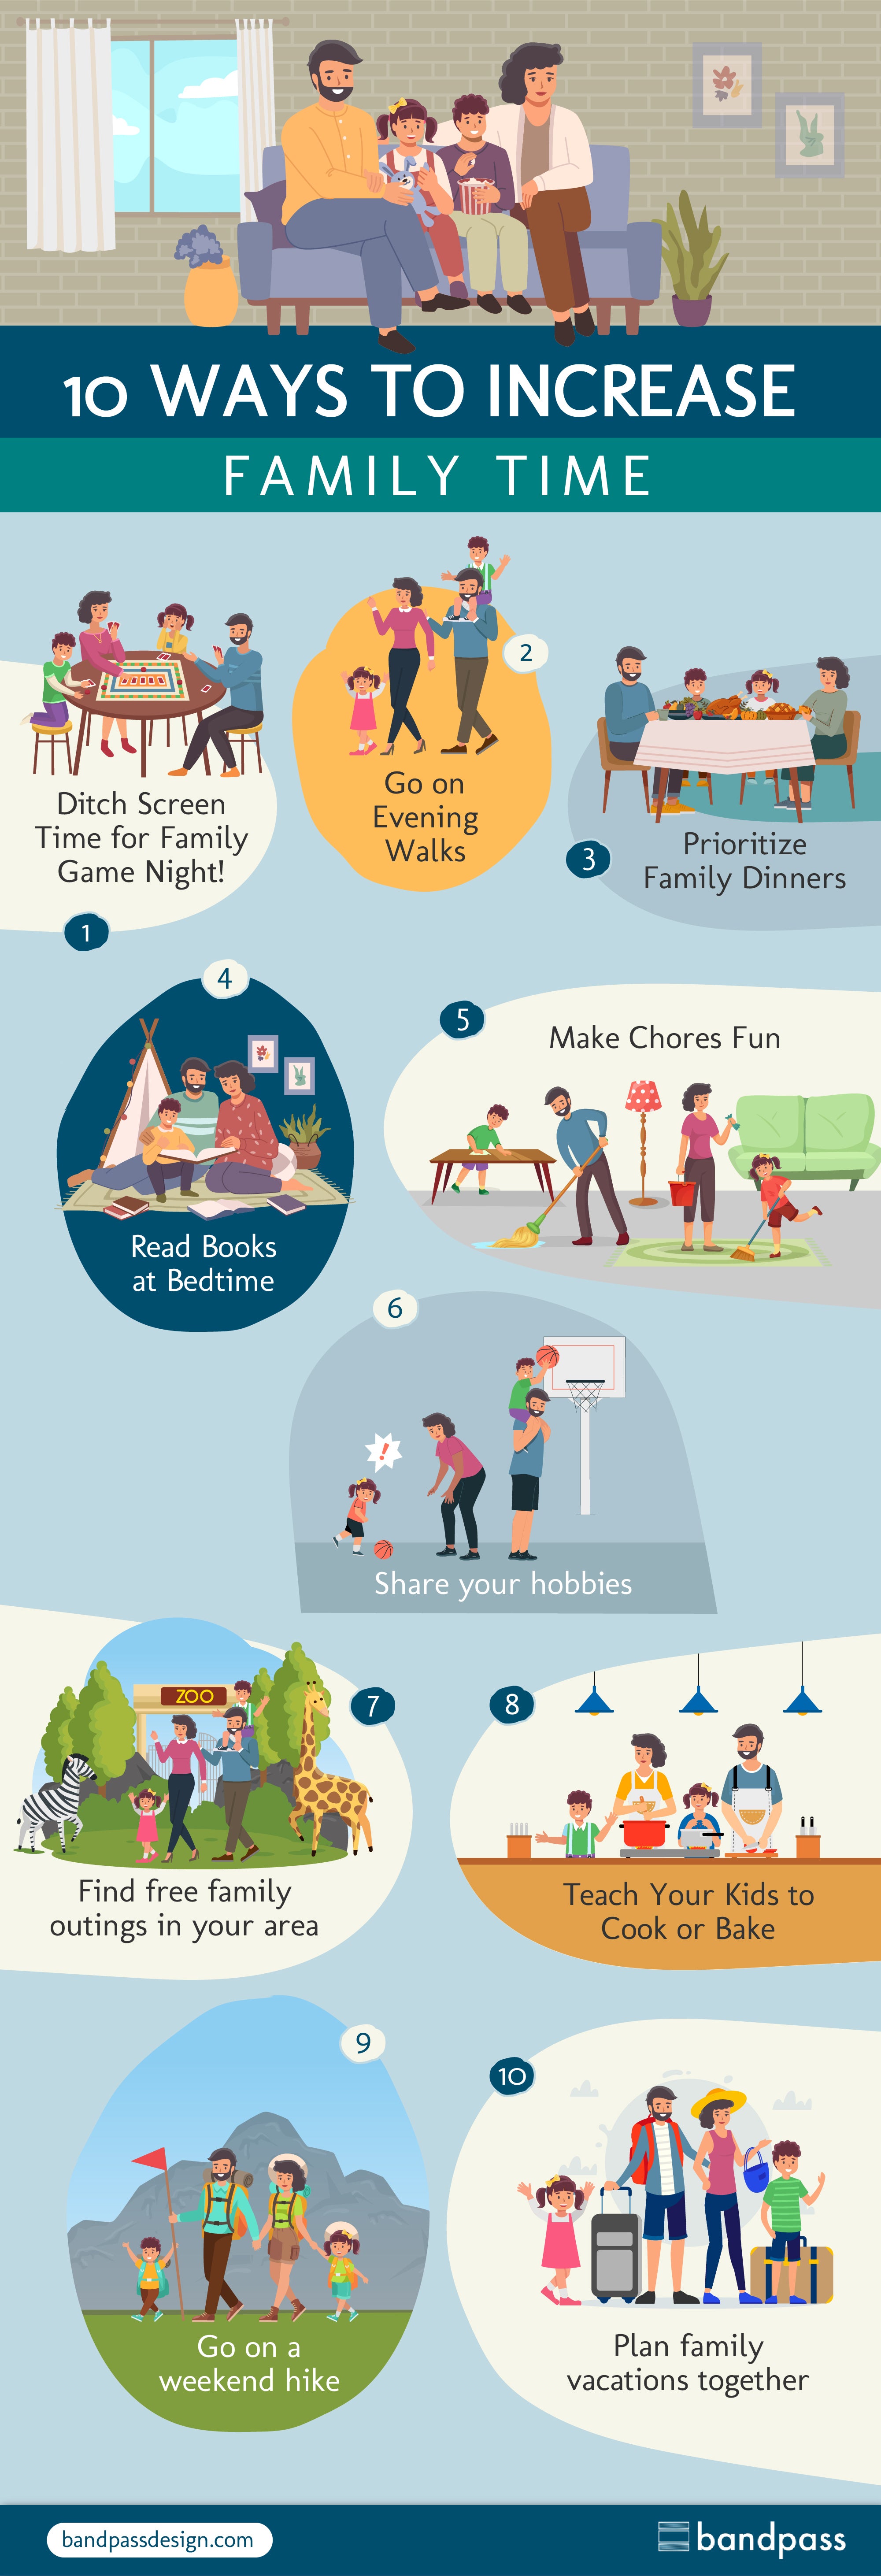 10 ways to increase family time